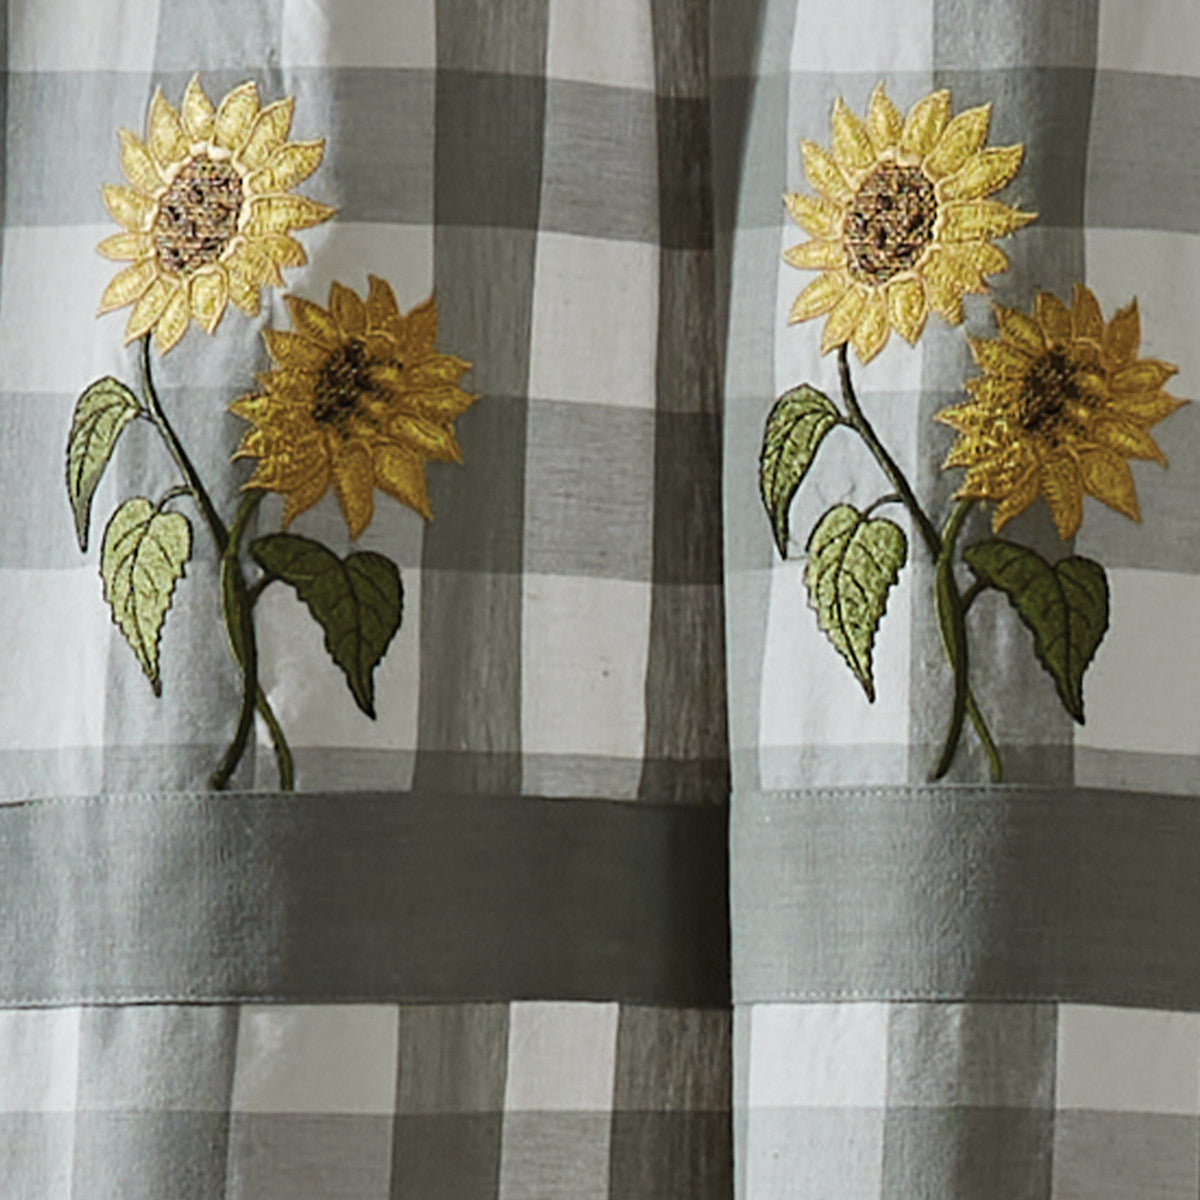 Wicklow Check Sunflower Embroidered Shower Curtain 72" - Park Designs